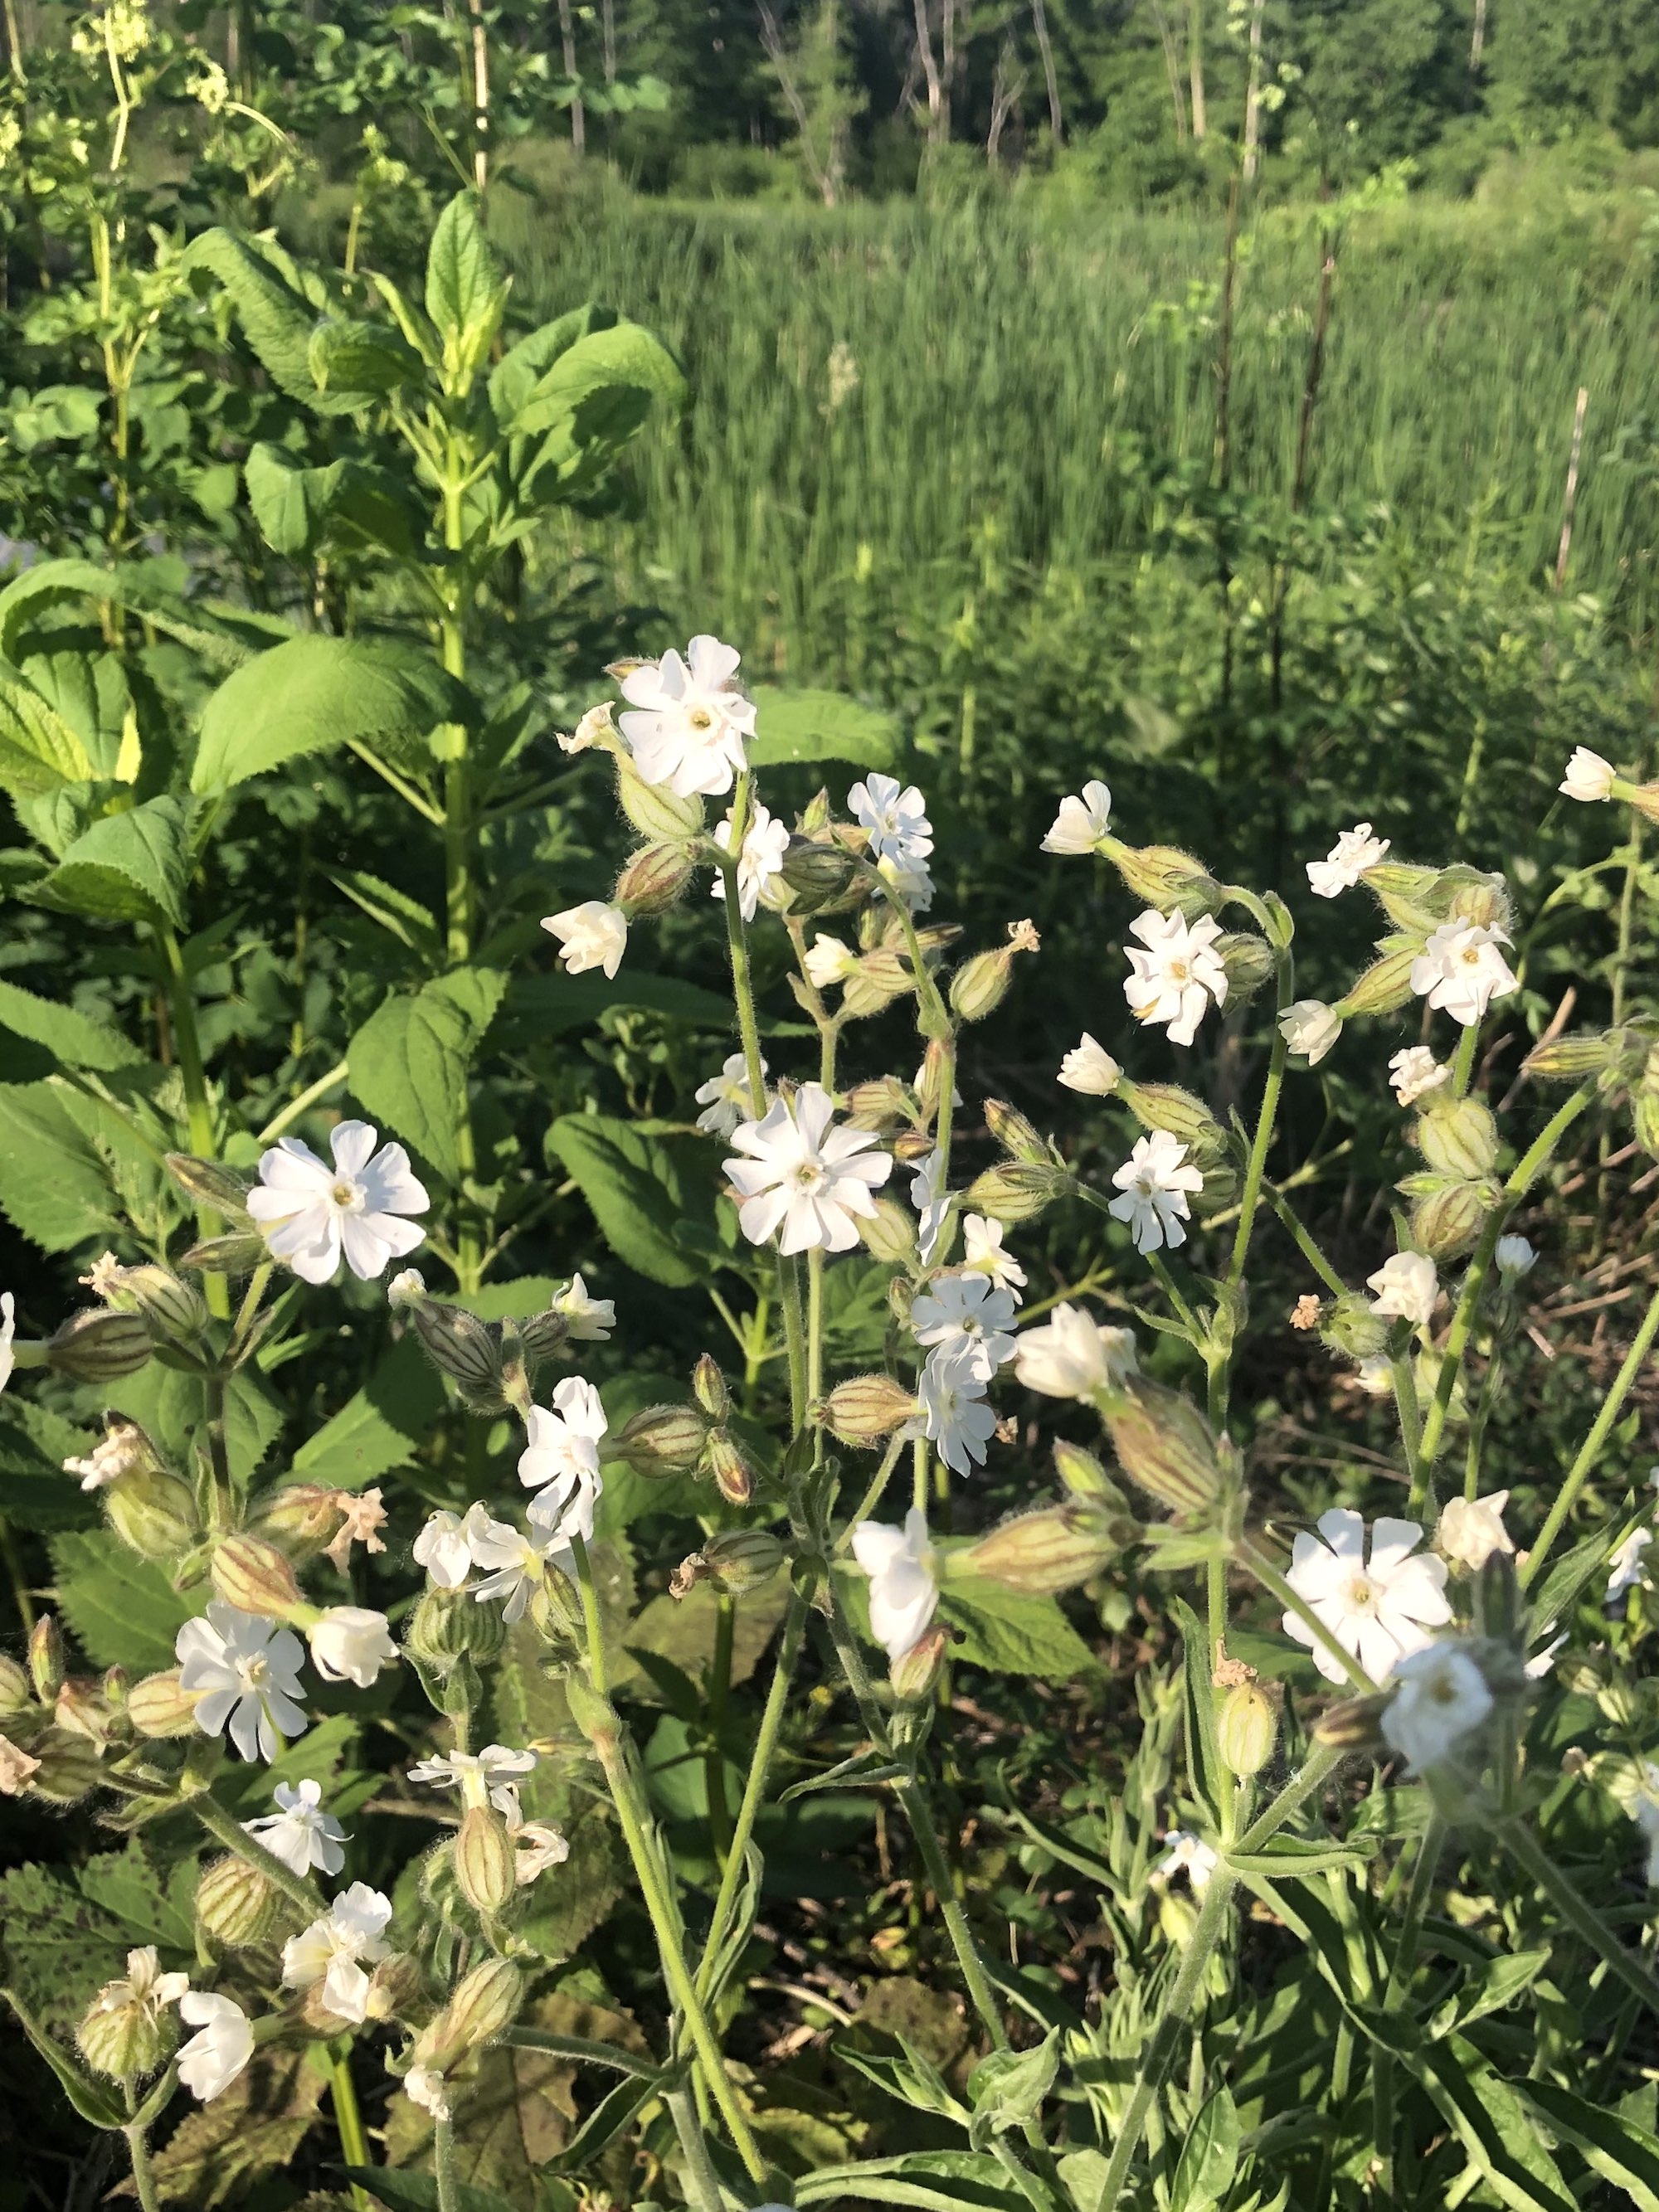 White Campion along shore of Marion Dunn Pond in Madison, Wisconsin on June 3, 2021.